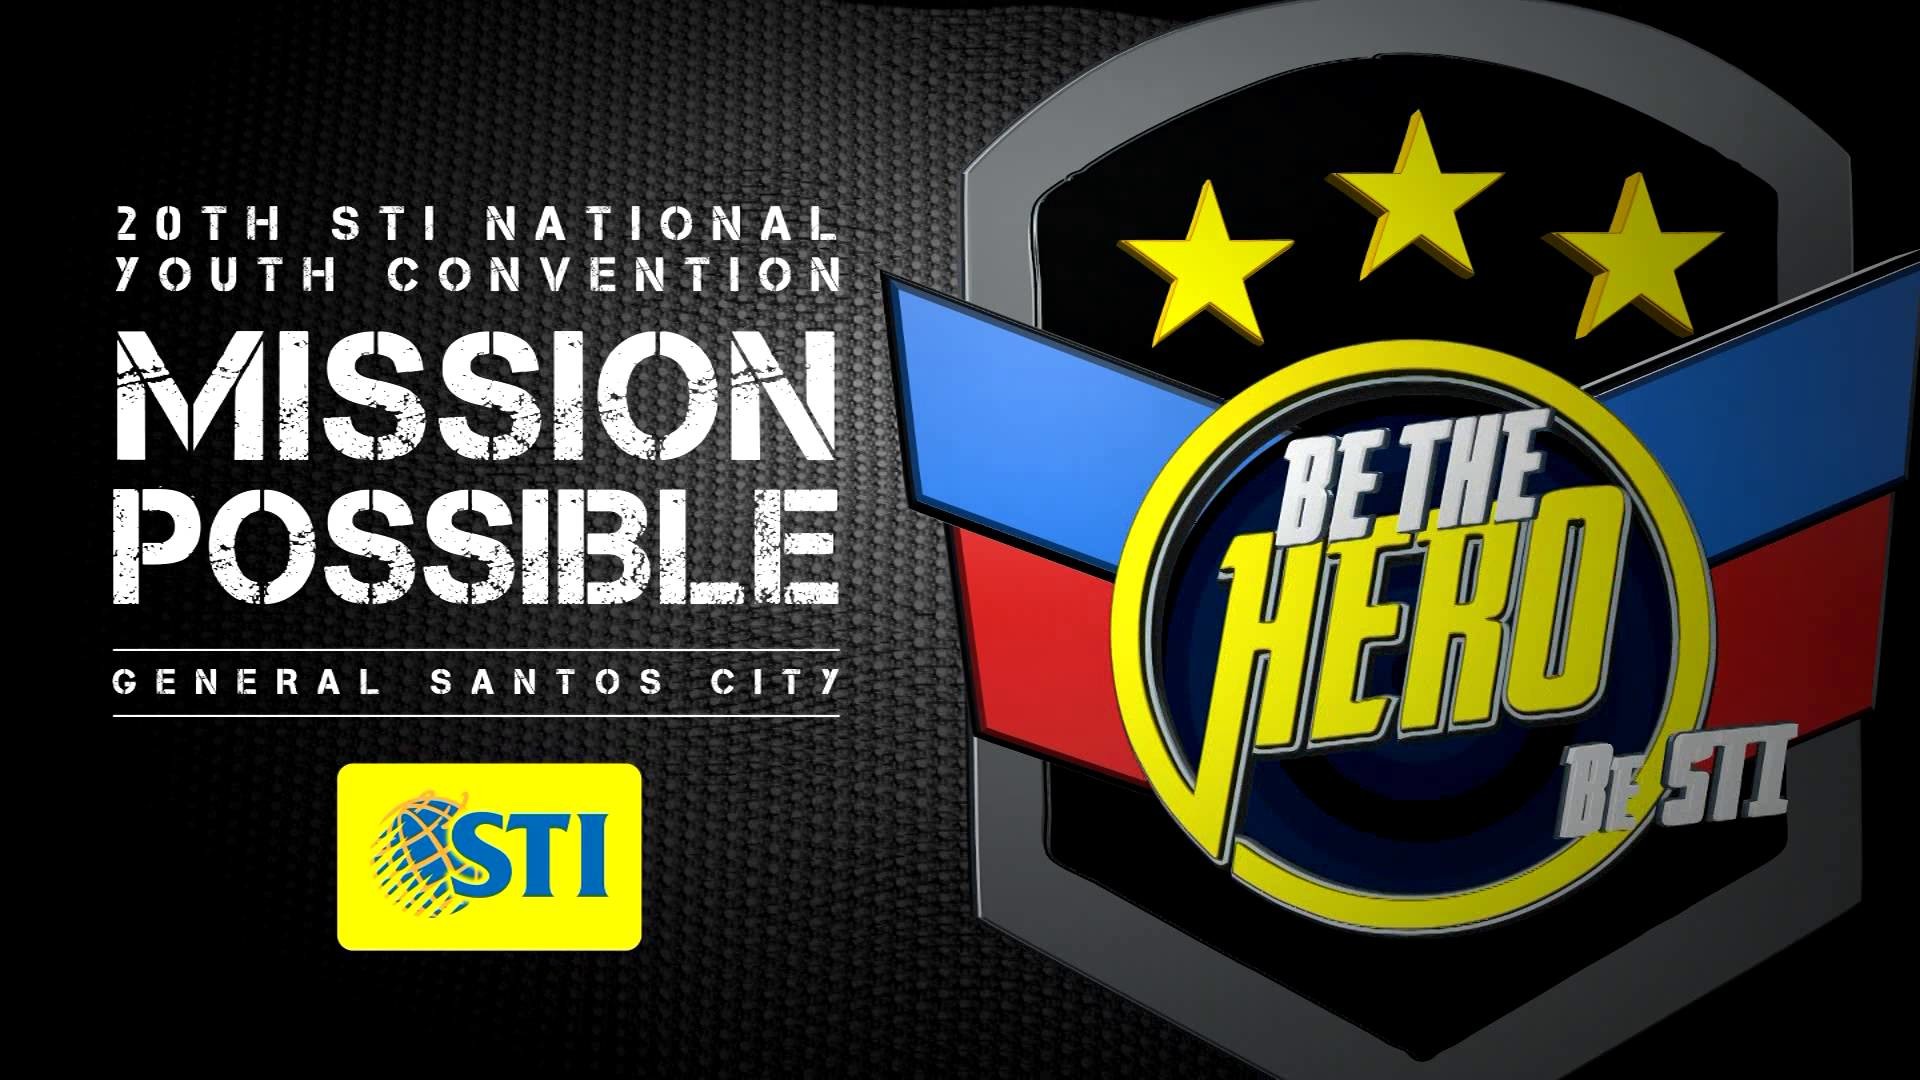 1920x1080 20th STI National Youth Convention: Mission Possible (Backdrop) - YouTube